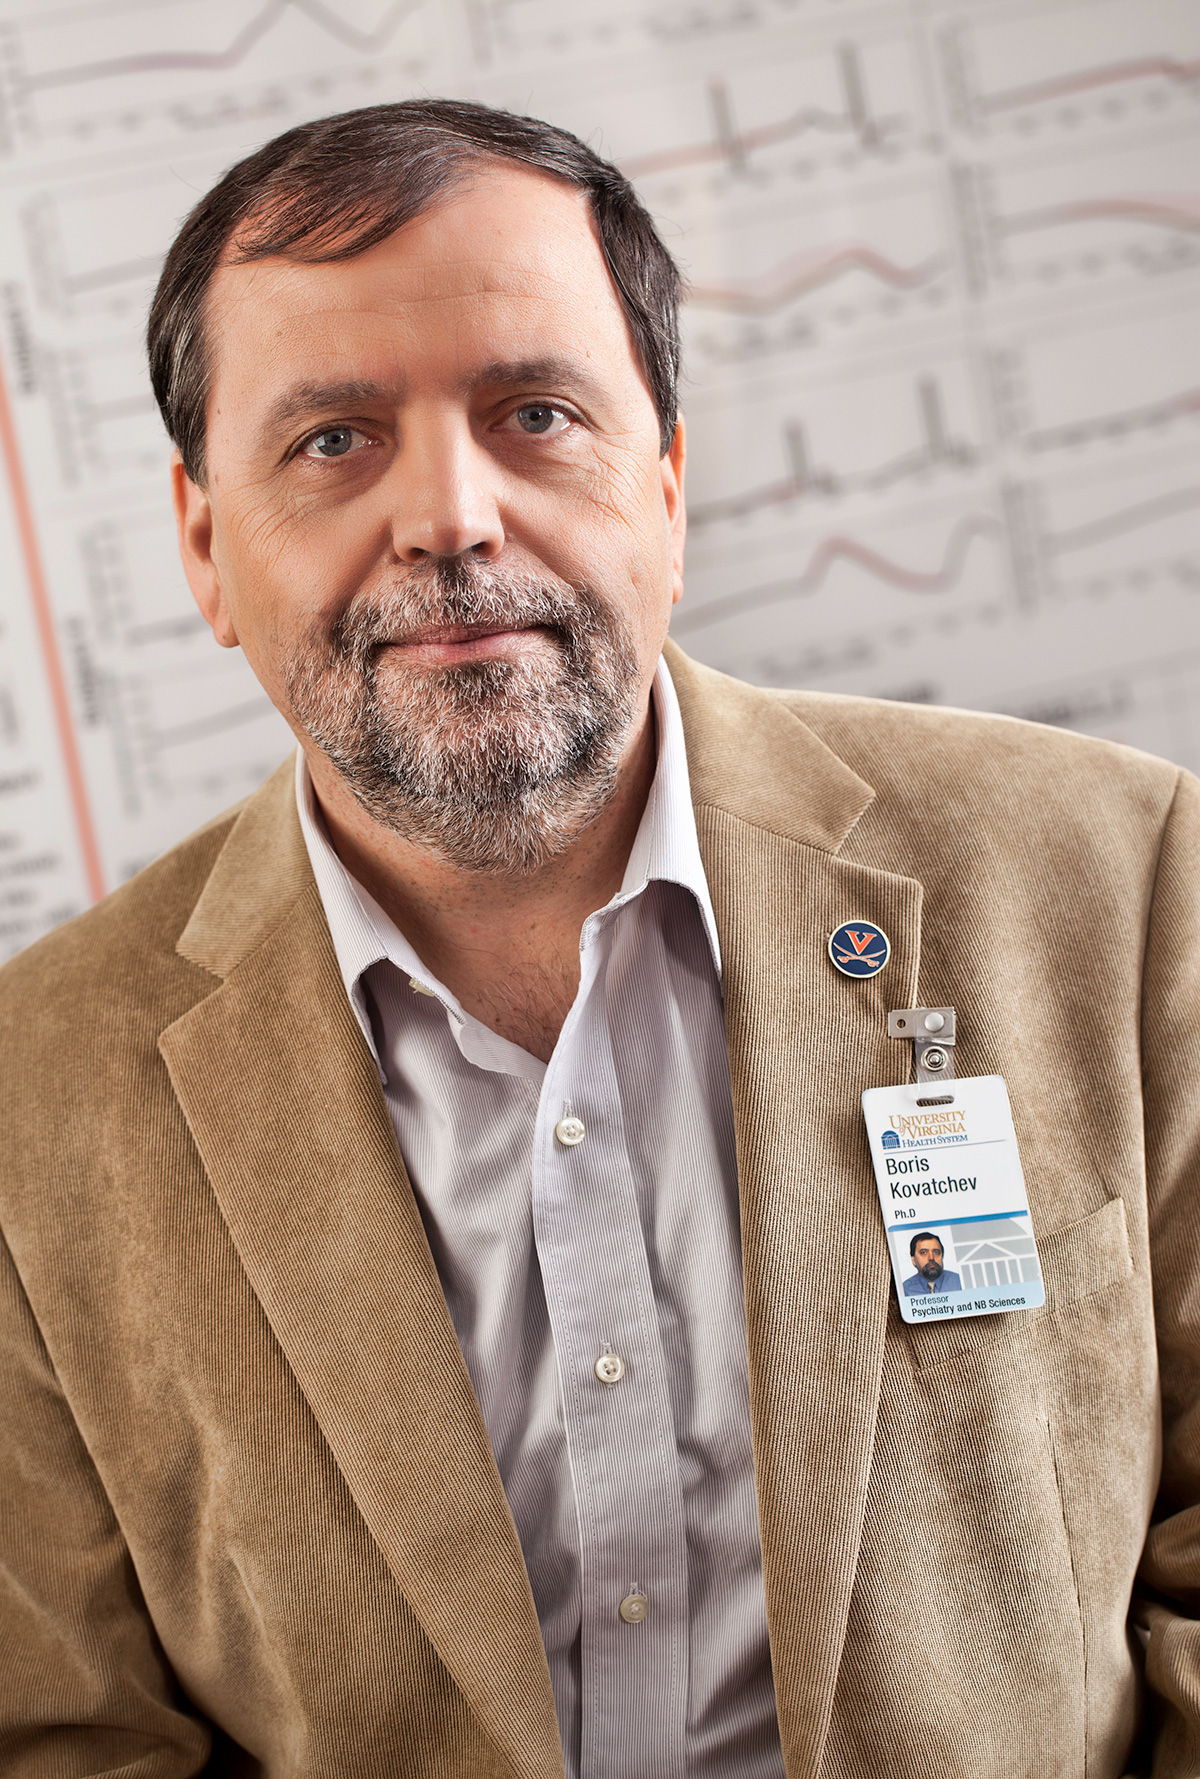 Boris Kovatchev has worked with researchers at UVA and elsewhere to develop and refine the artificial pancreas, which will soon undergo human trials.